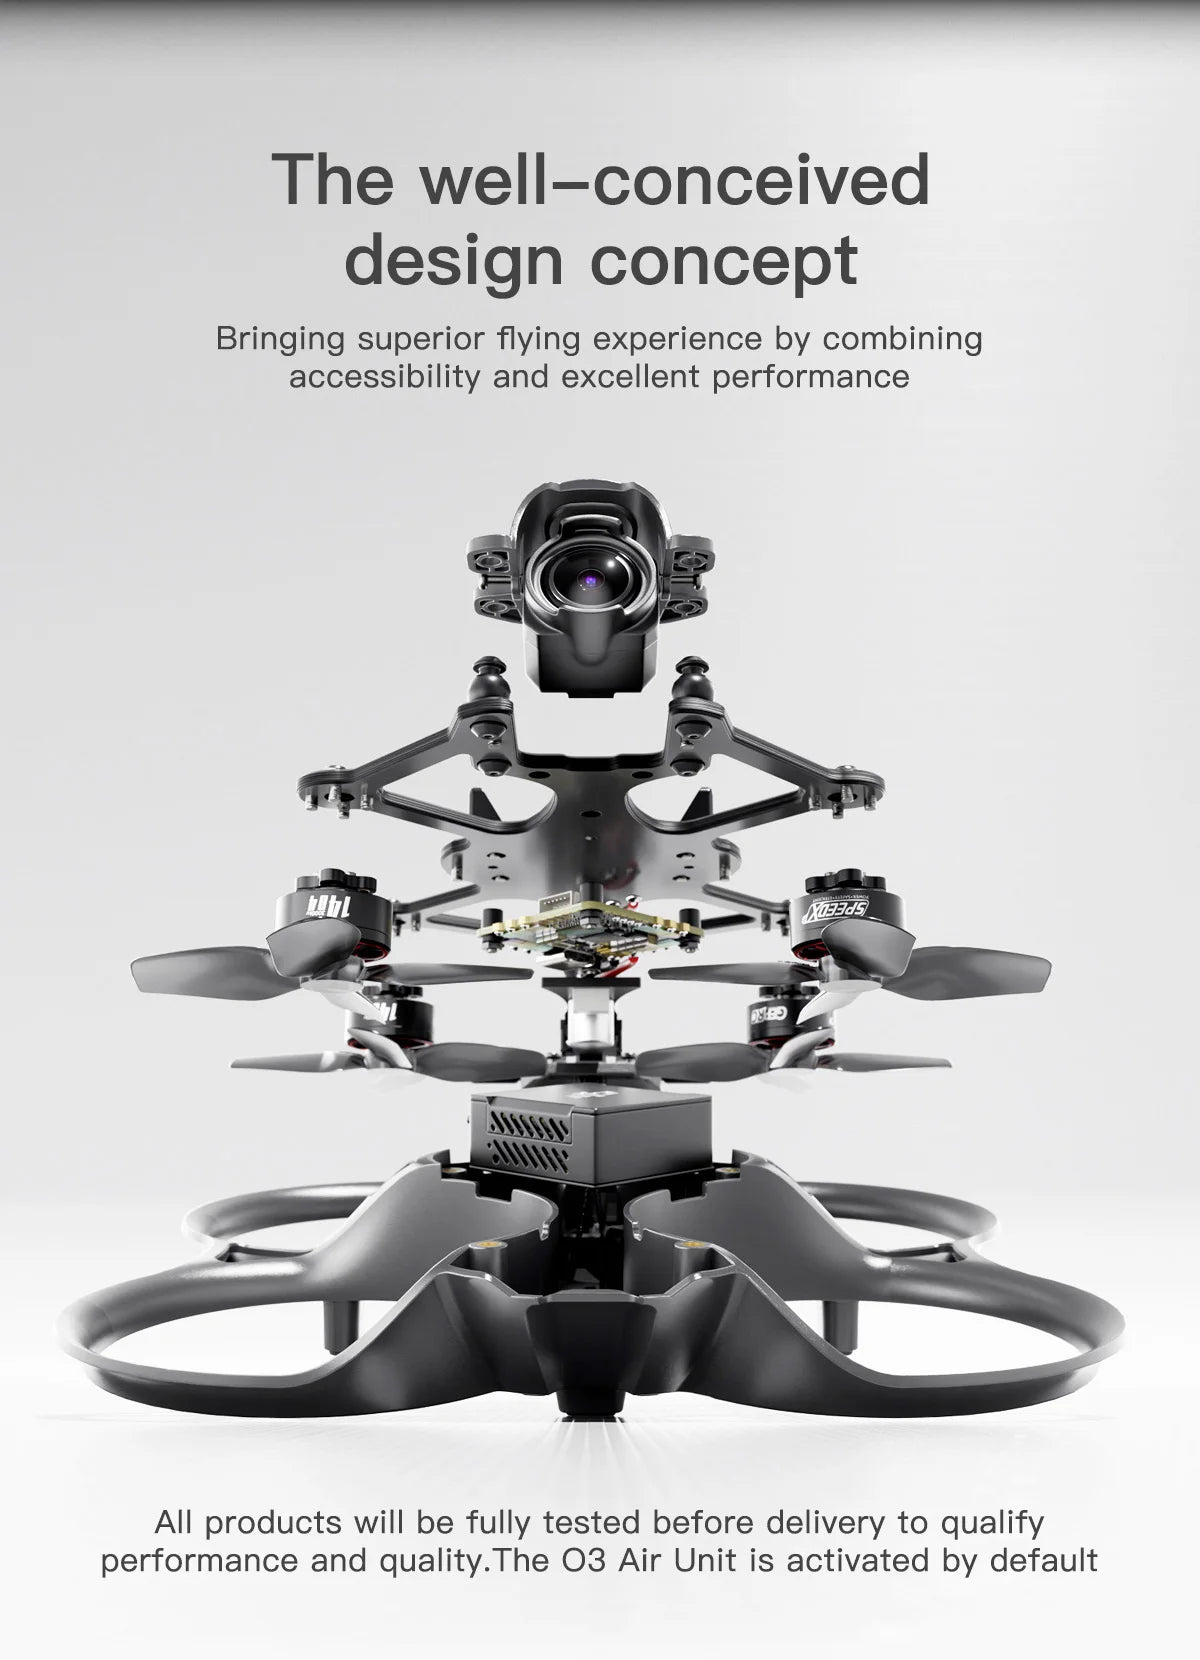 GEPRC Cinebot25 HD Wasp FPV Drone, the well-conceived design concept Bringing superior flying experience by combining accessibility and excellent performance 